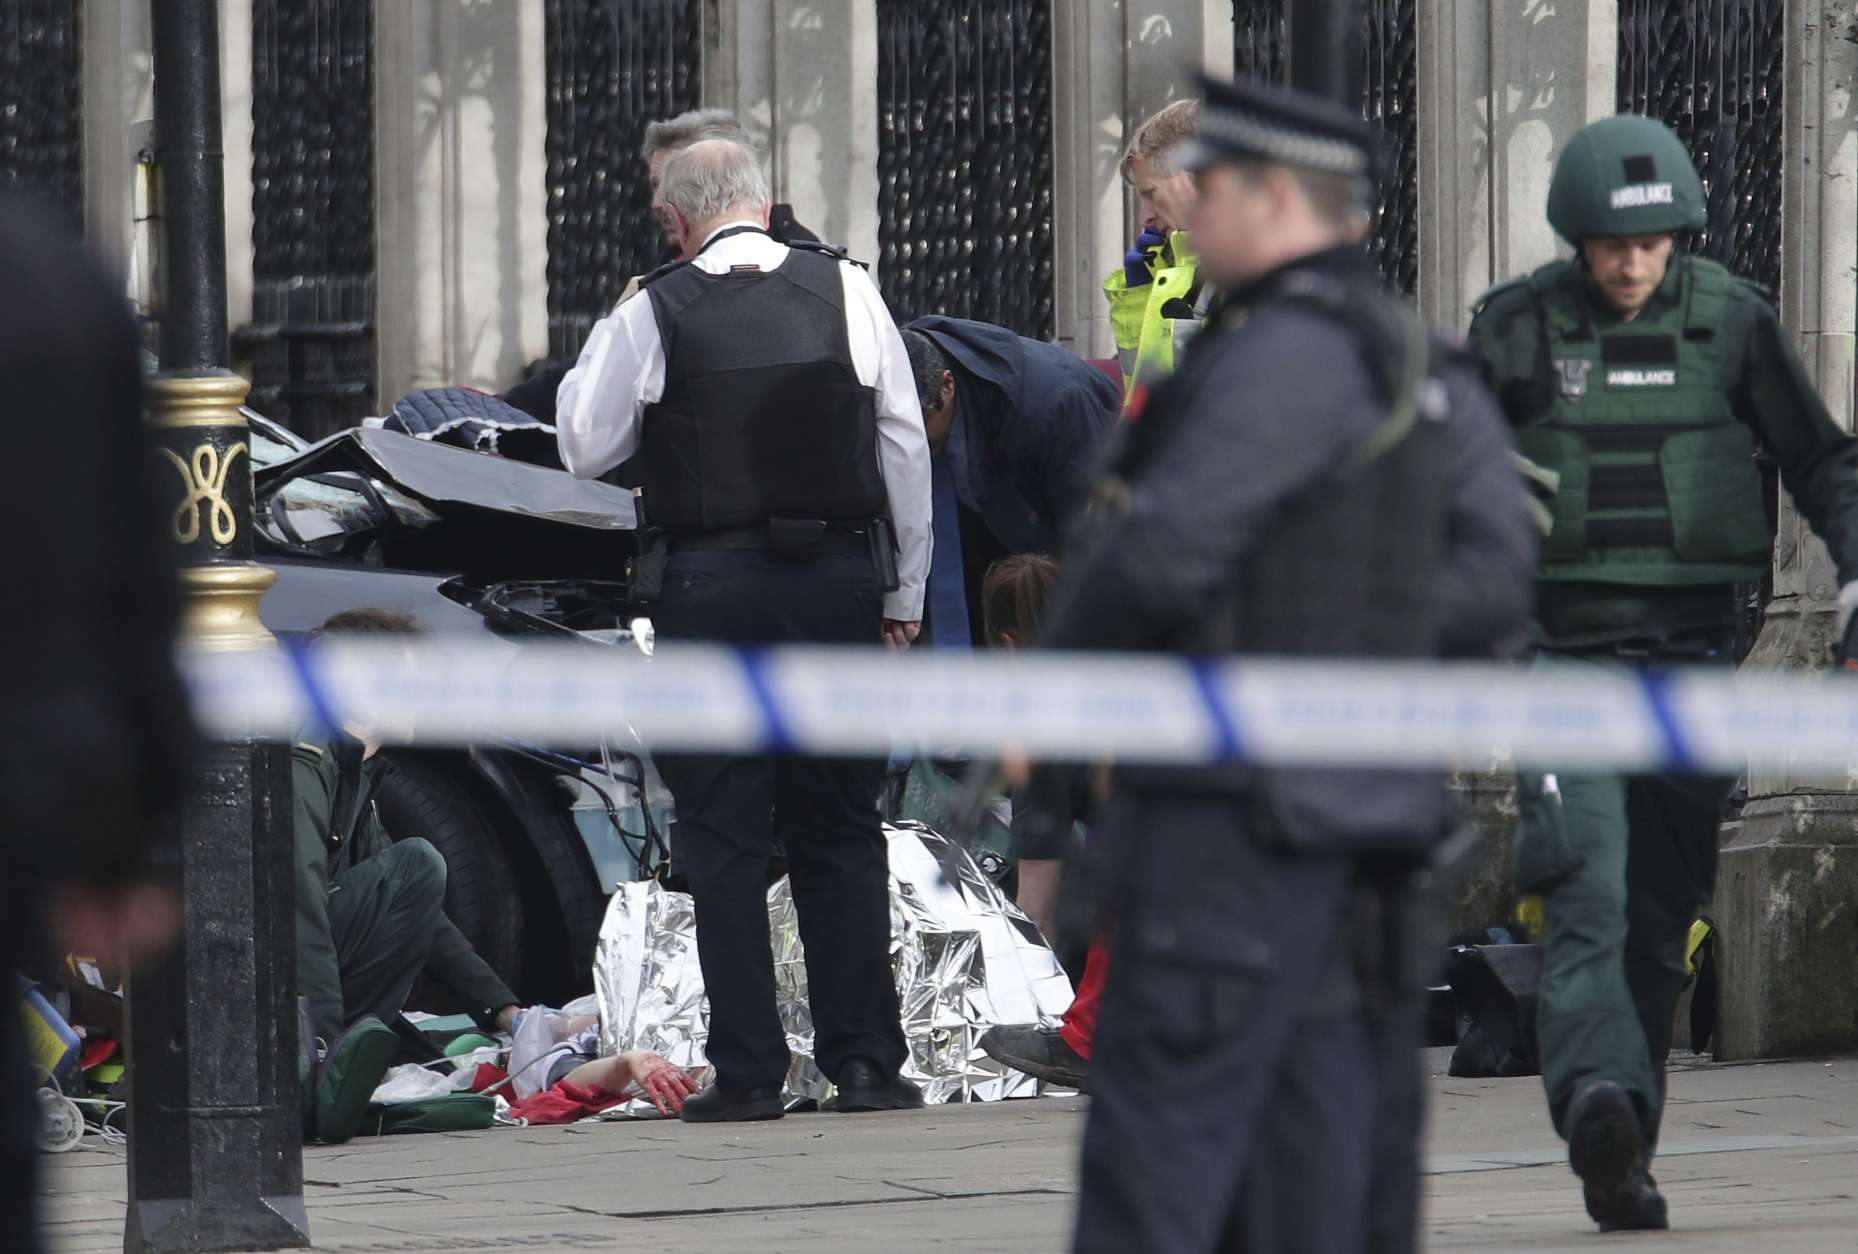 Emergency personnel tend to an injured person close to the Palace of Westminster, London, Wednesday, March 22, 2017.  London police say officers called to a 'firearms incident' on Westminster Bridge, near Parliament. The leader of Britain's House of Commons says a man has been shot by police at Parliament. David Liddington also said there were "reports of further violent incidents in the vicinity."  London's police said officers had been called to a firearms incident on Westminster Bridge, near the parliament. Britain's MI5 says it is too early to say if the incident is terror-related. (Yui Mok/PA via AP).